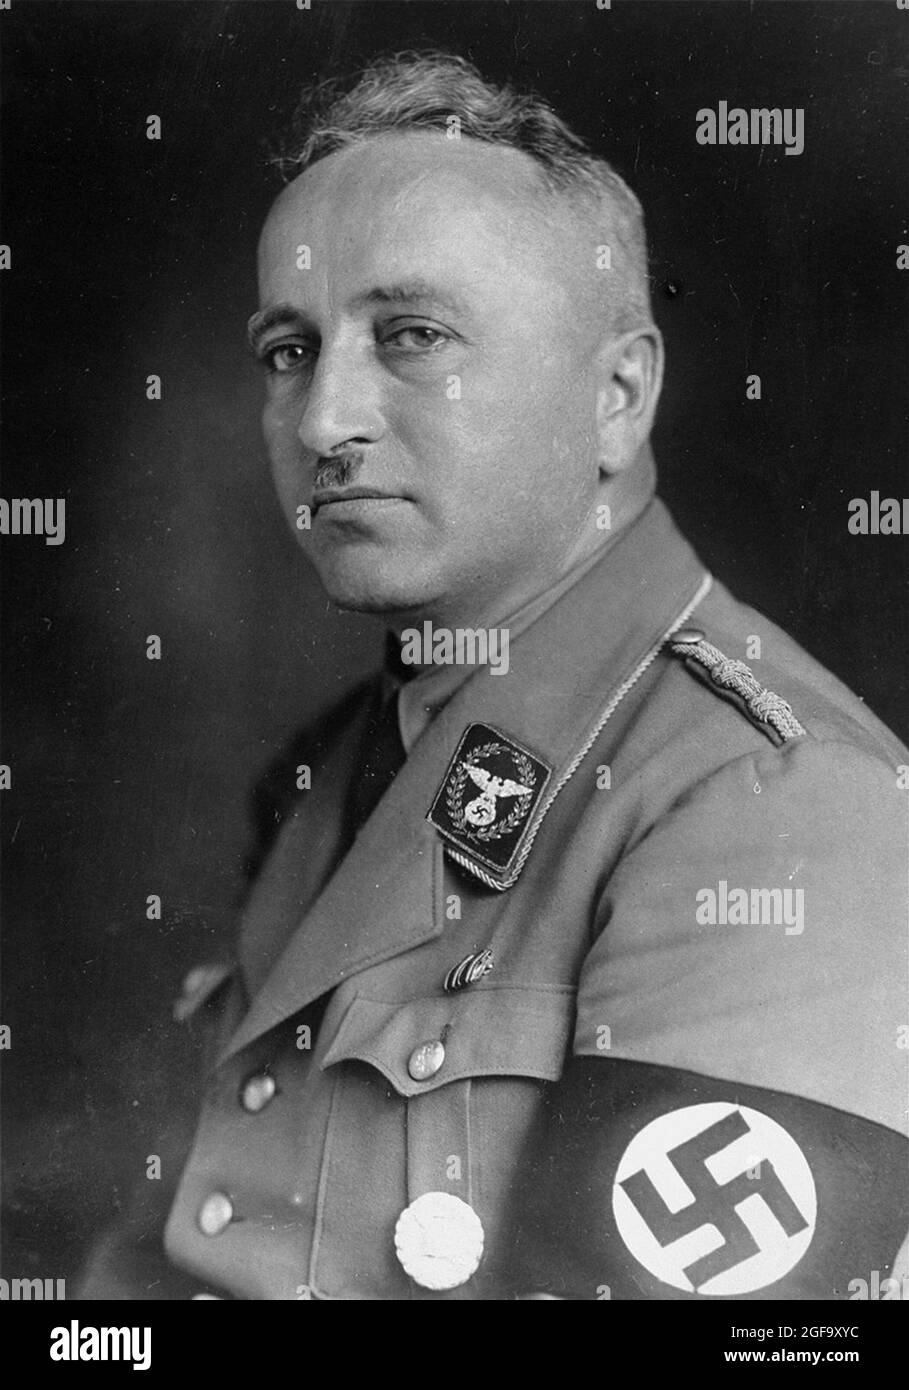 A portrait of Nazi leader Robert Ley. He was head of the German Labour Front from 1933 to 1945. He was captured in 1945 and committed suicide in jail. Stock Photo